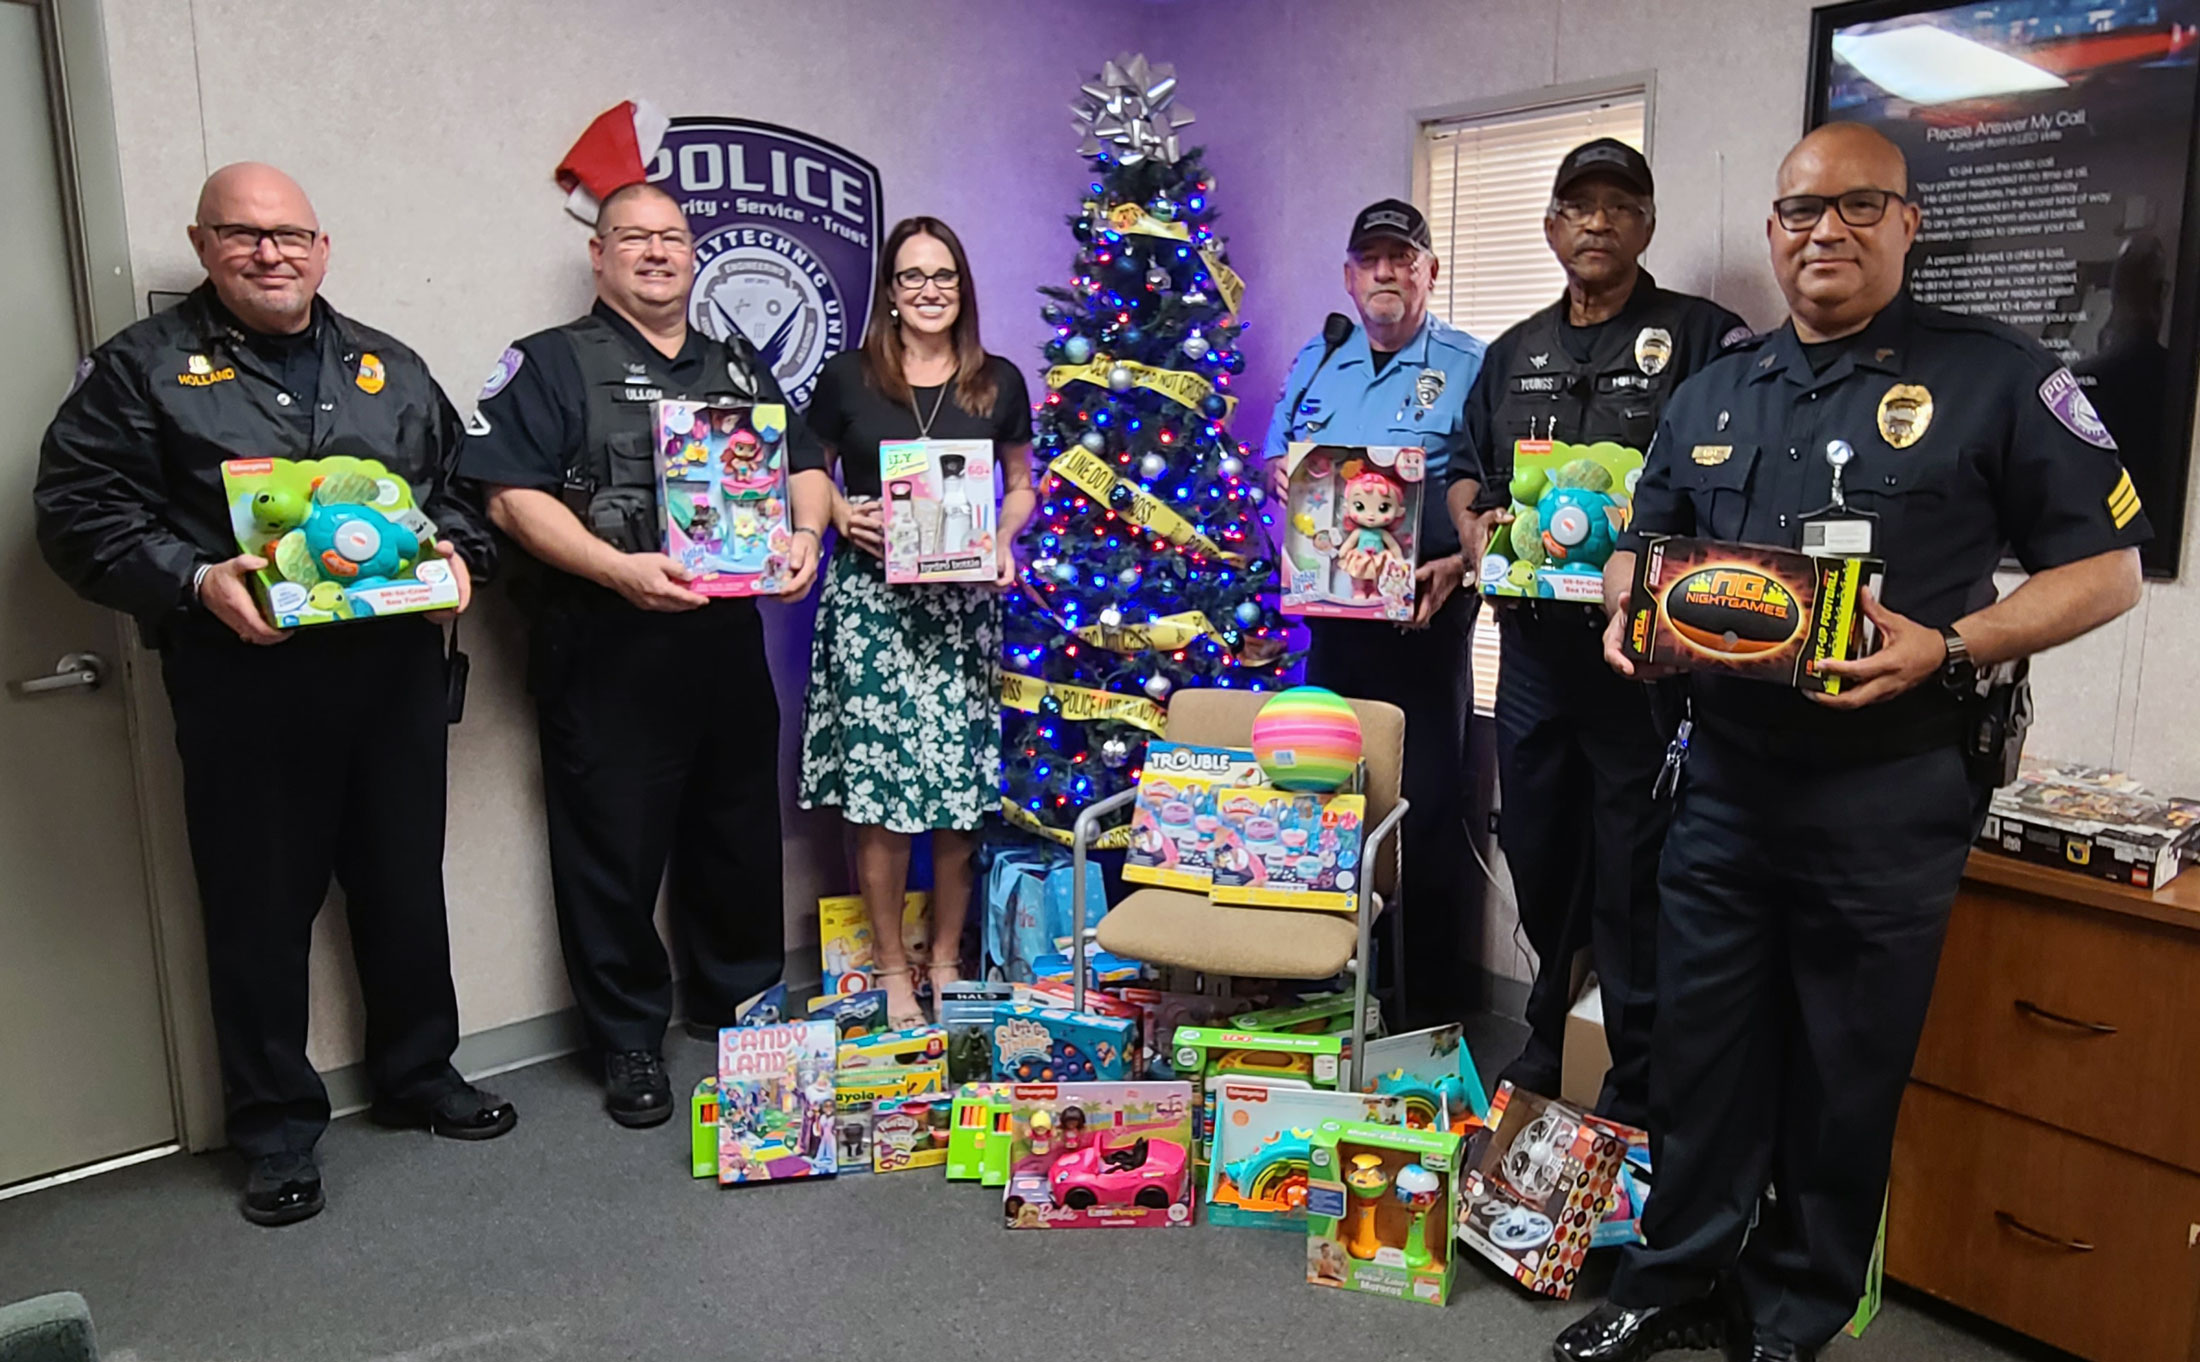 Annual police toy drive boosts seasonal cheer in Lakeland and beyond